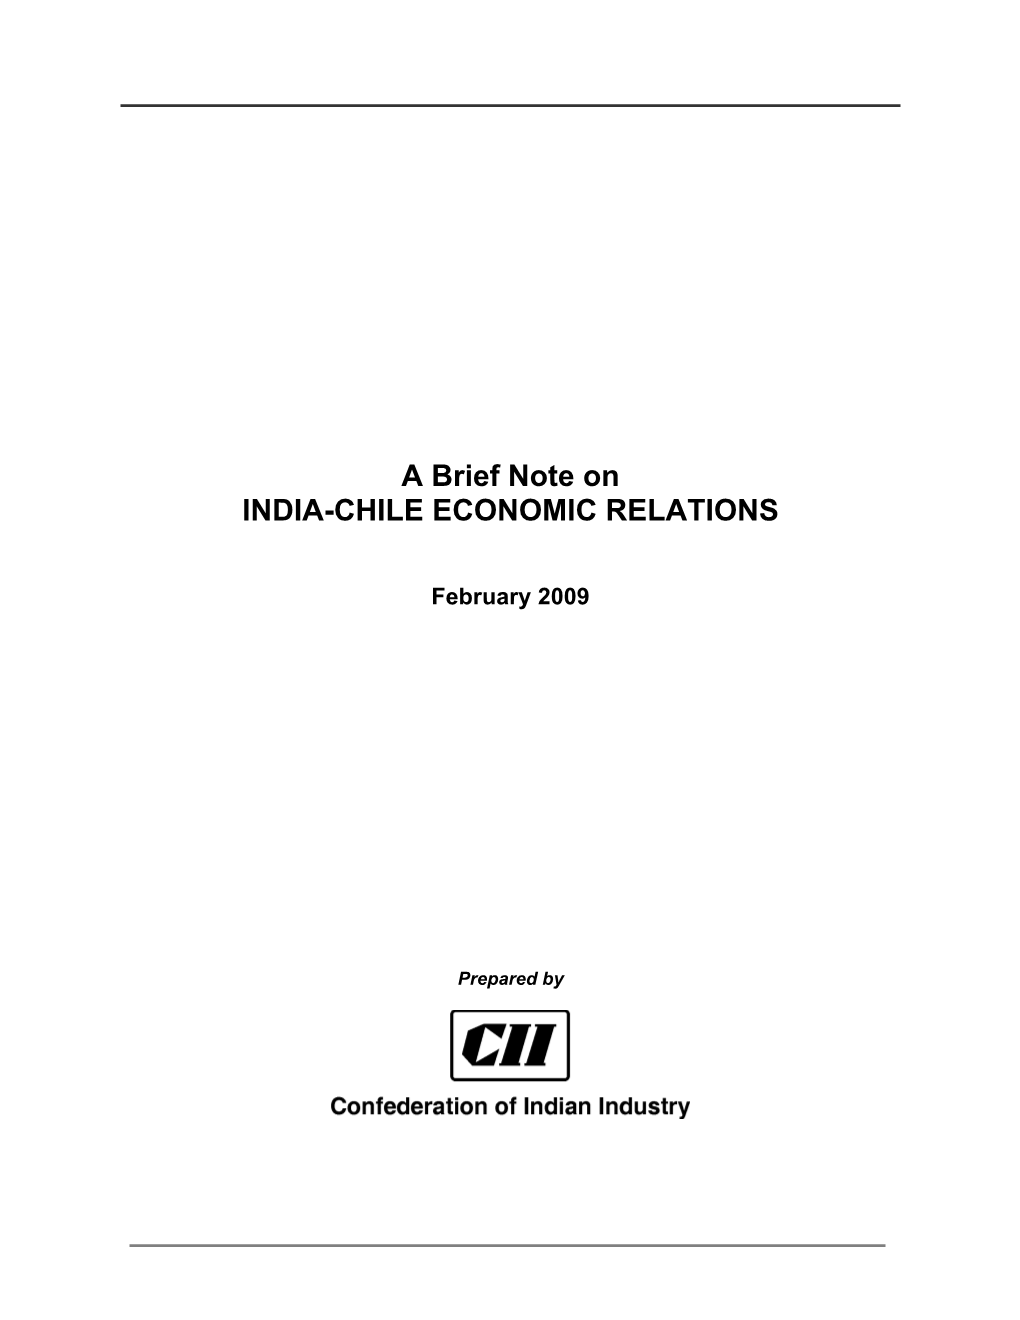 A Brief Note on INDIA-CHILE ECONOMIC RELATIONS